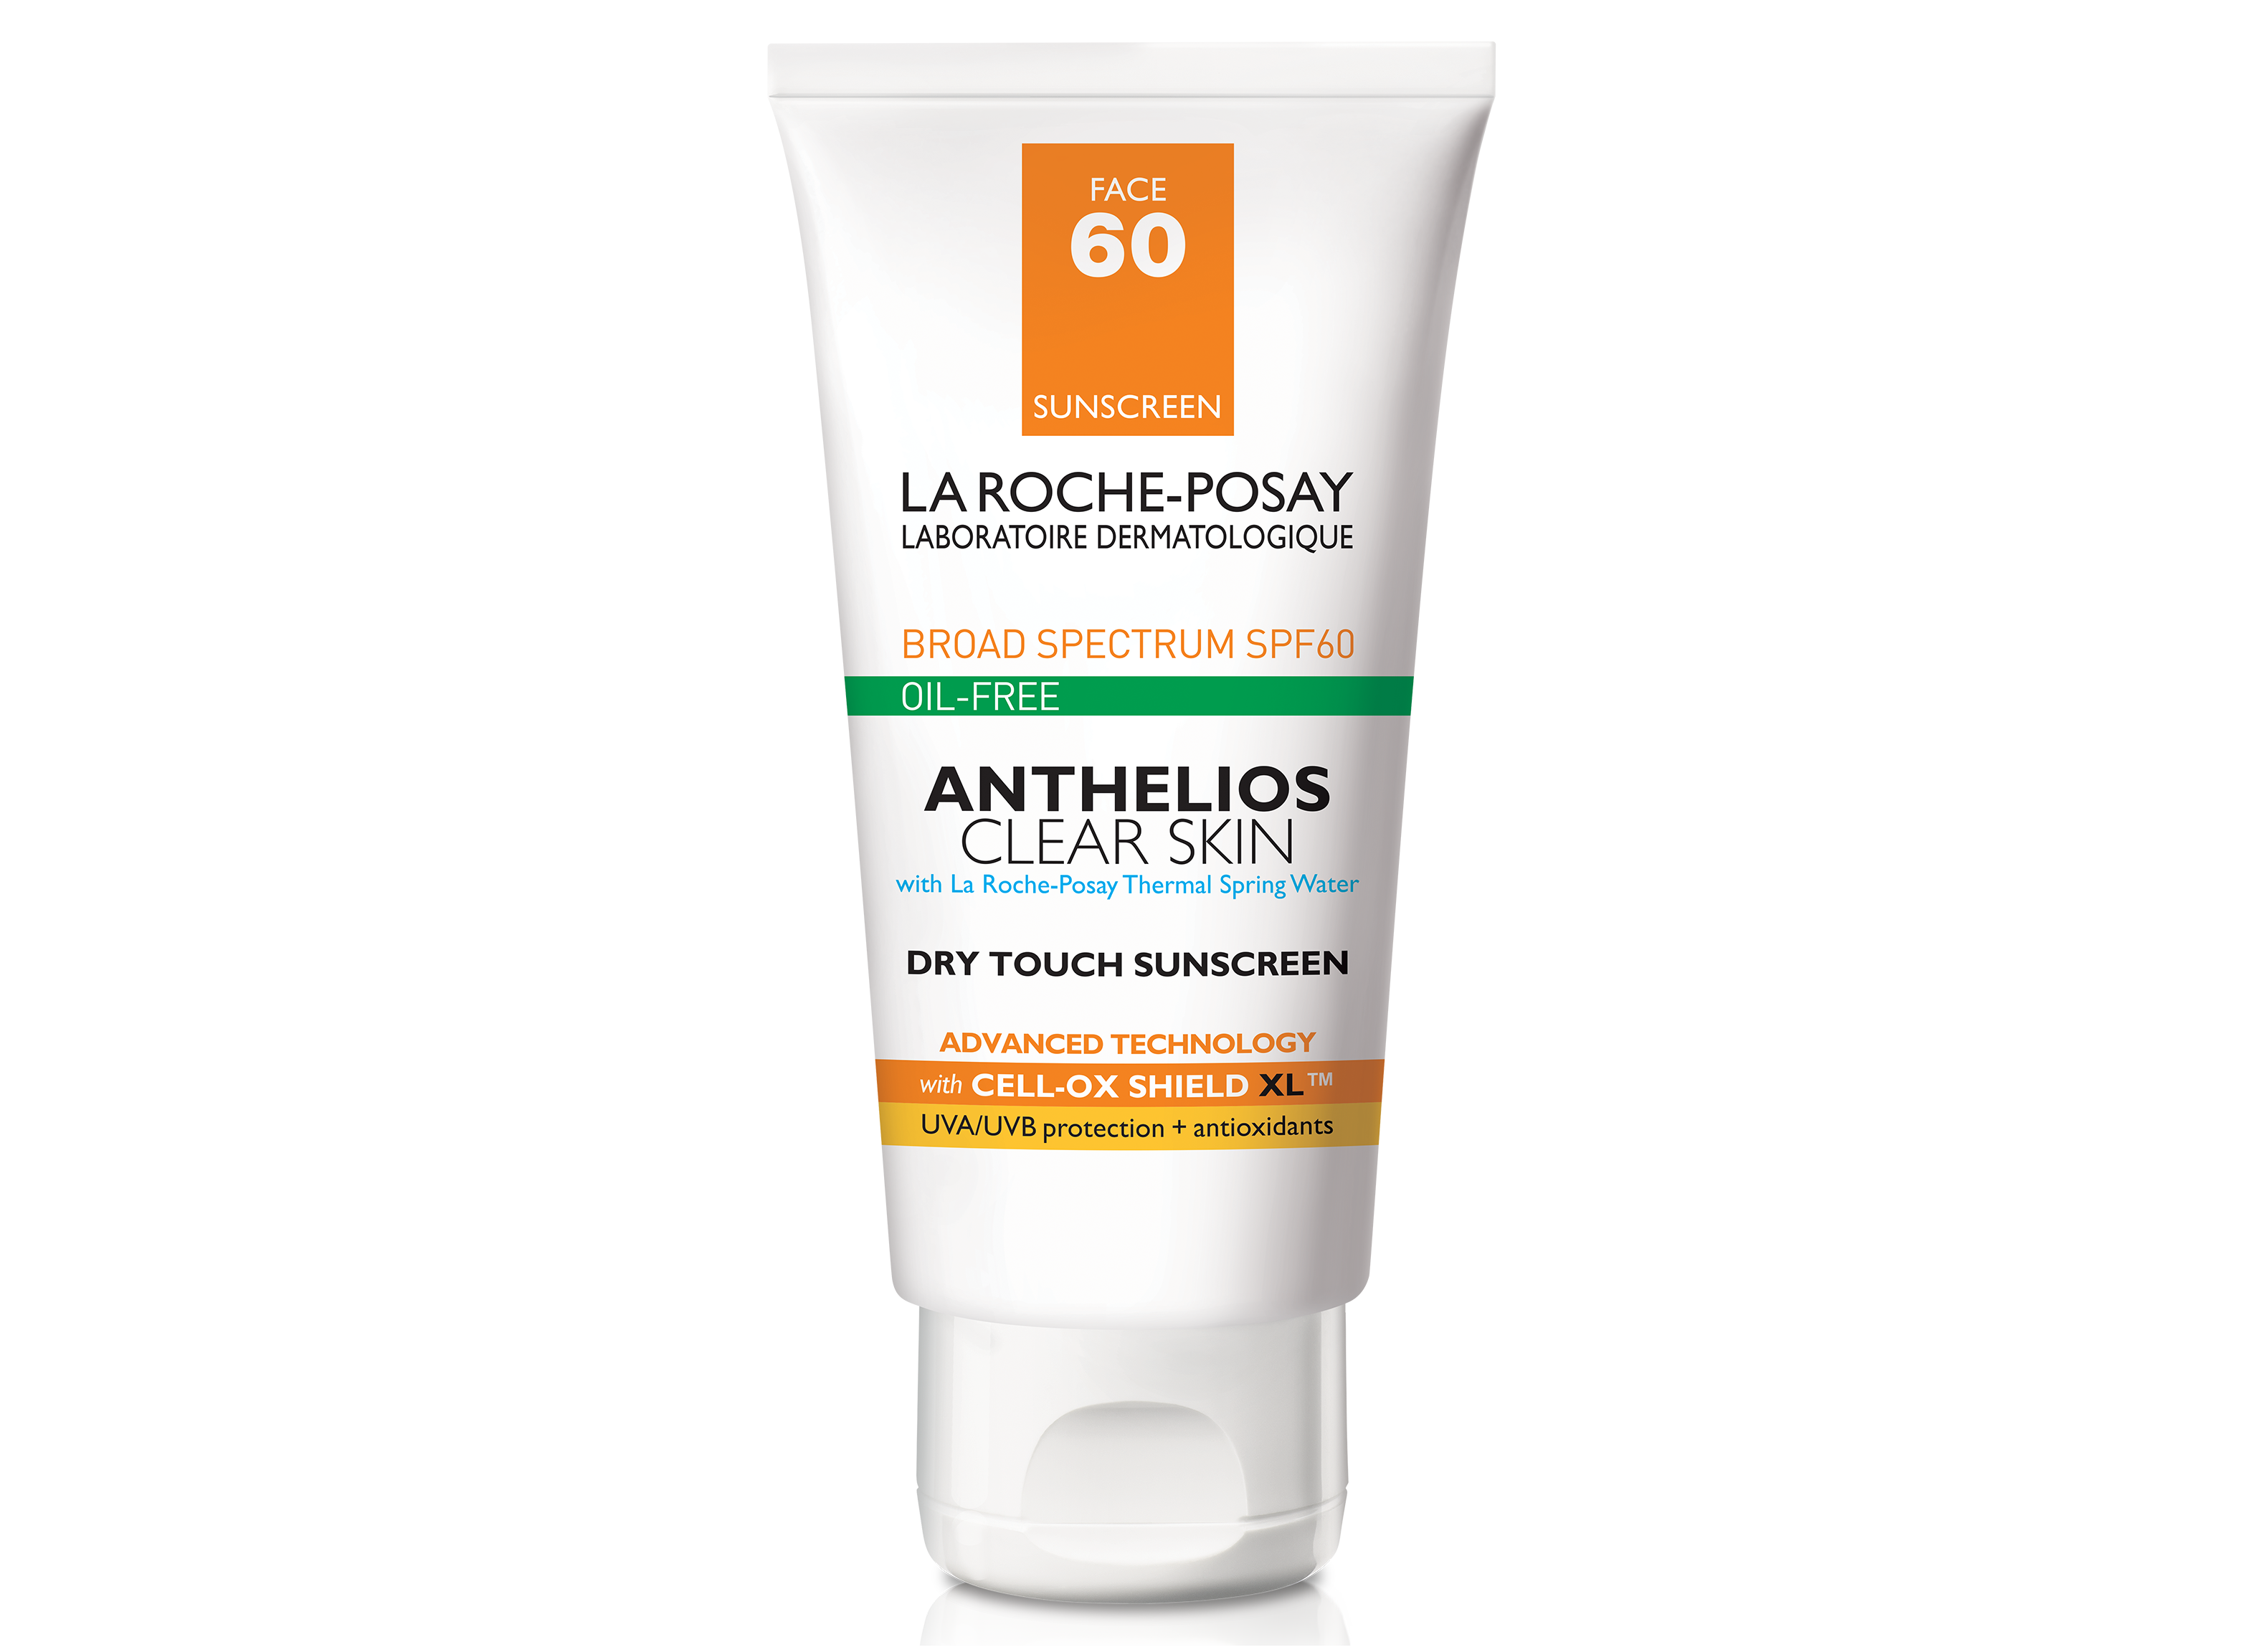 La Roche-Posay Anthelios Clear Skin Dry Touch Sunscreen SPF 60, Oil Free  Face Sunscreen for Acne Prone Skin, Won't Cause Breakouts